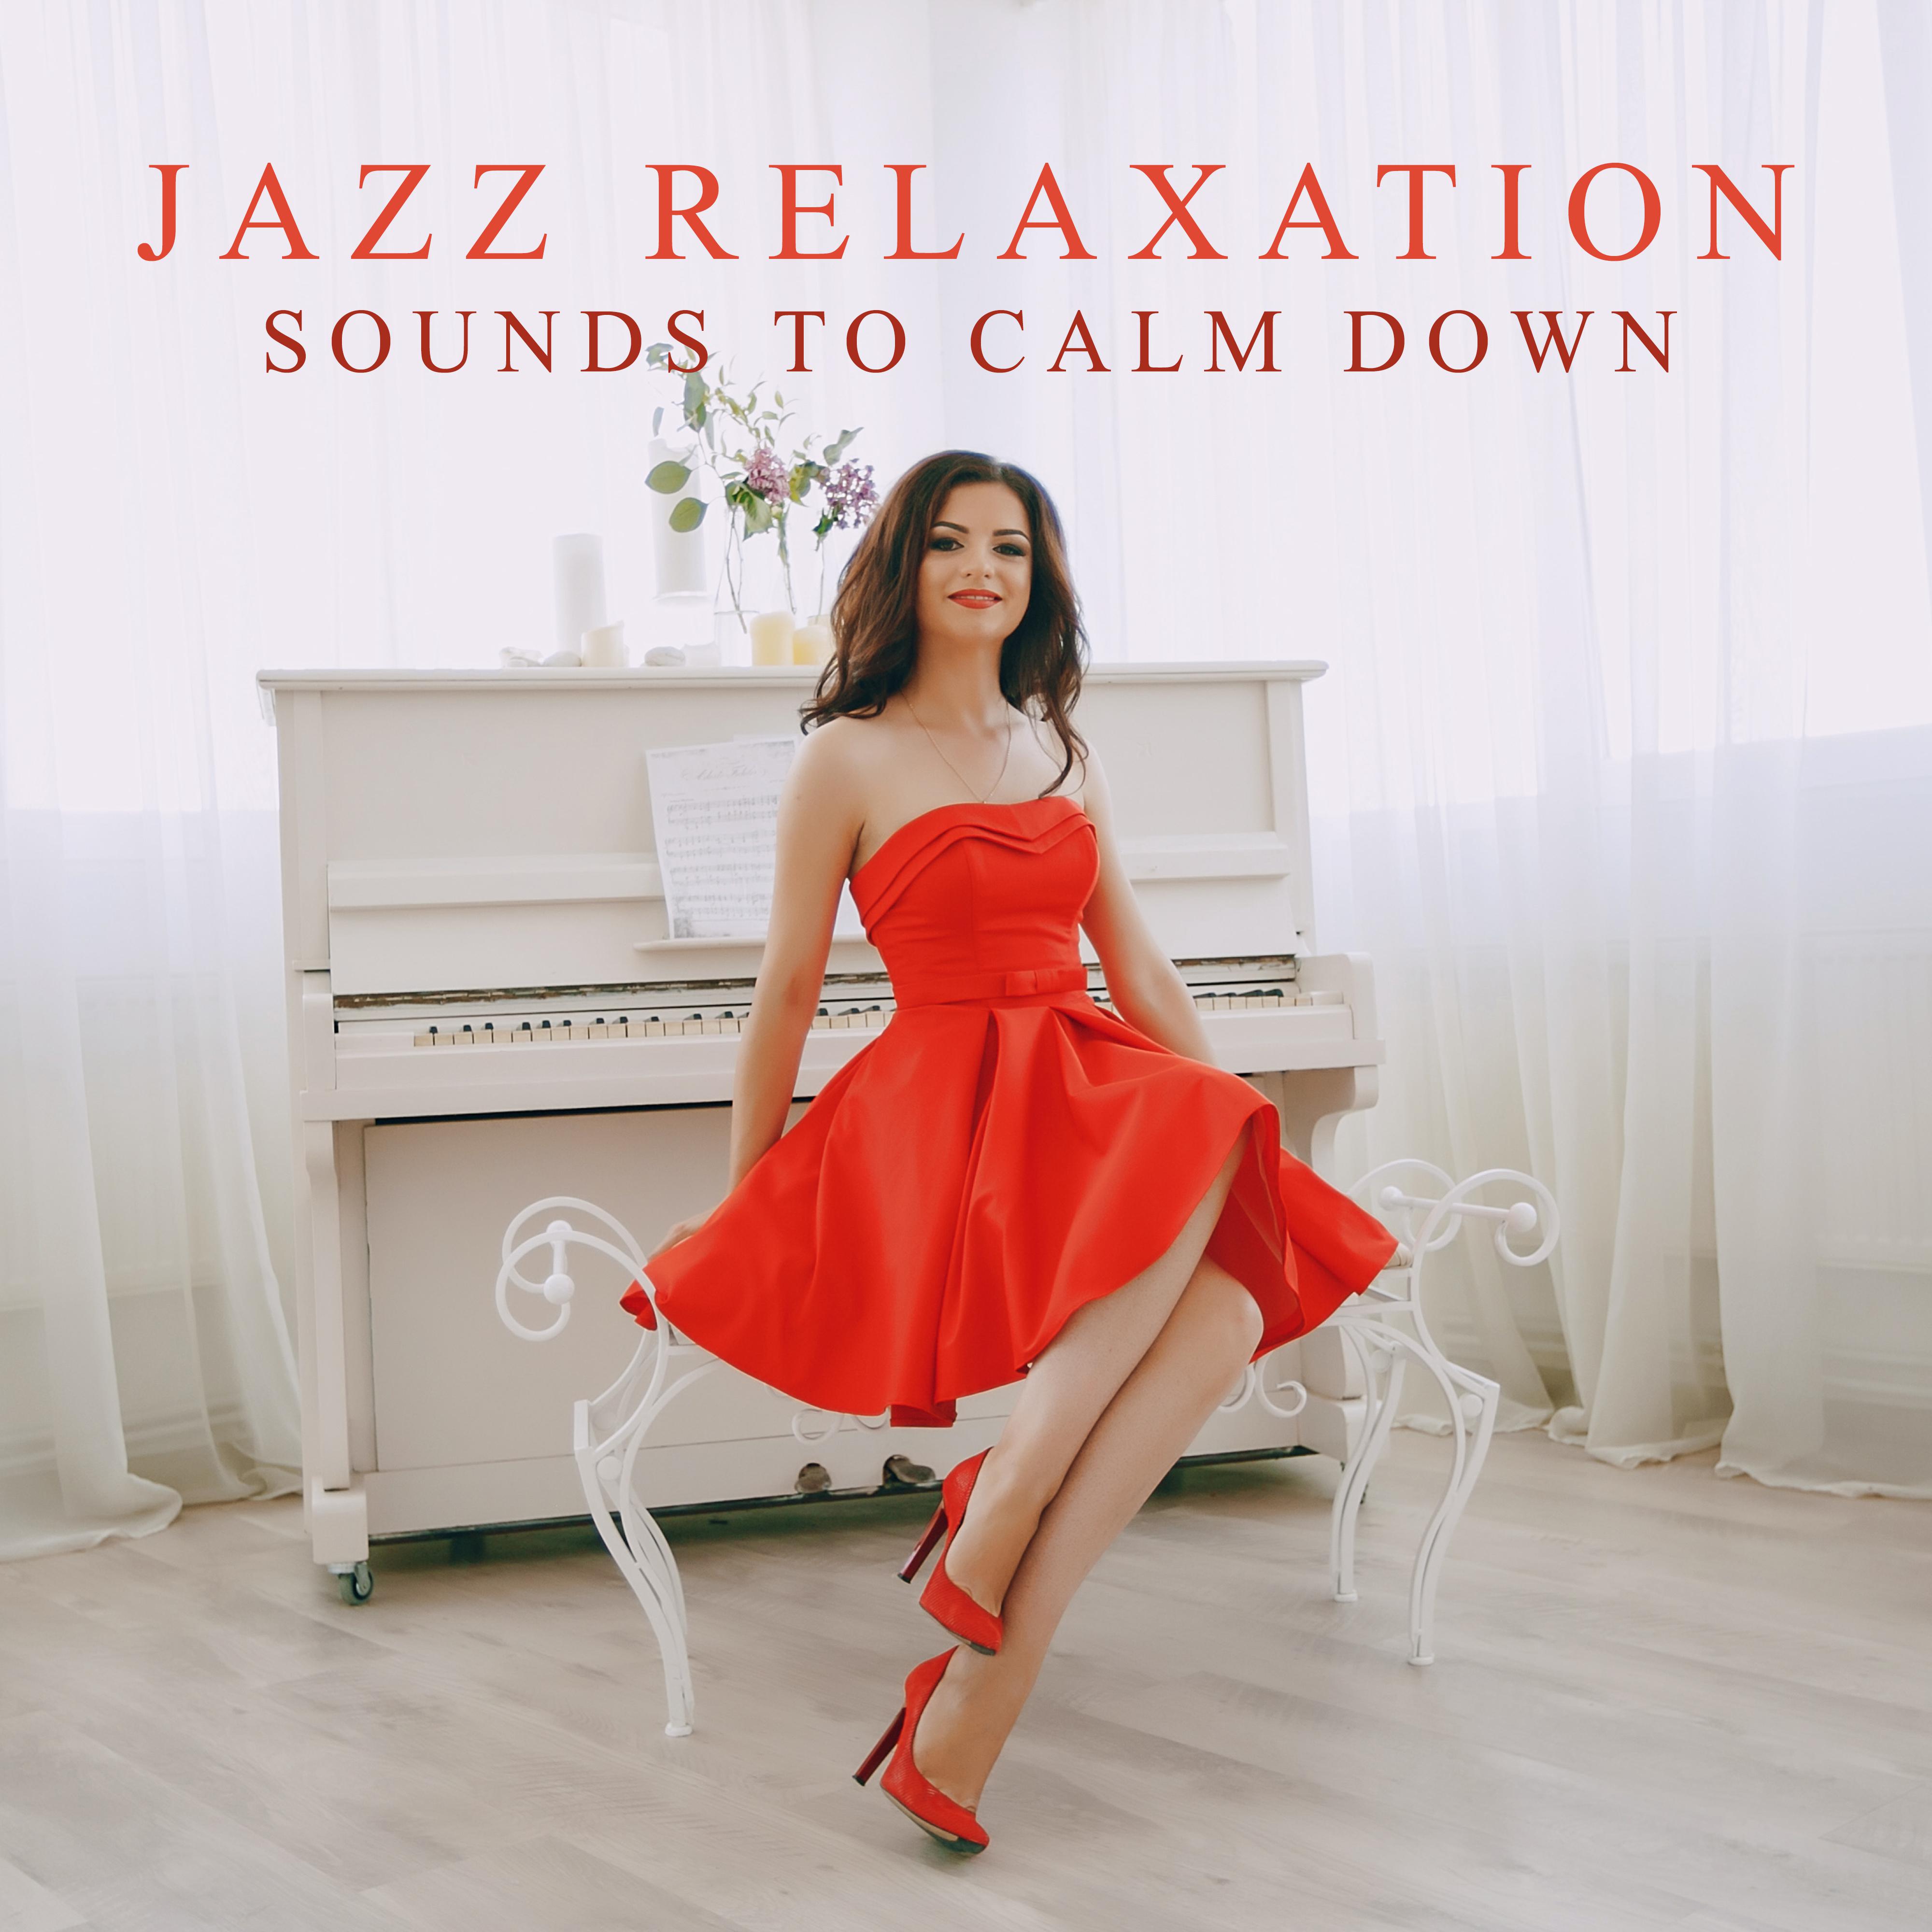 Jazz Relaxation Sounds to Calm Down